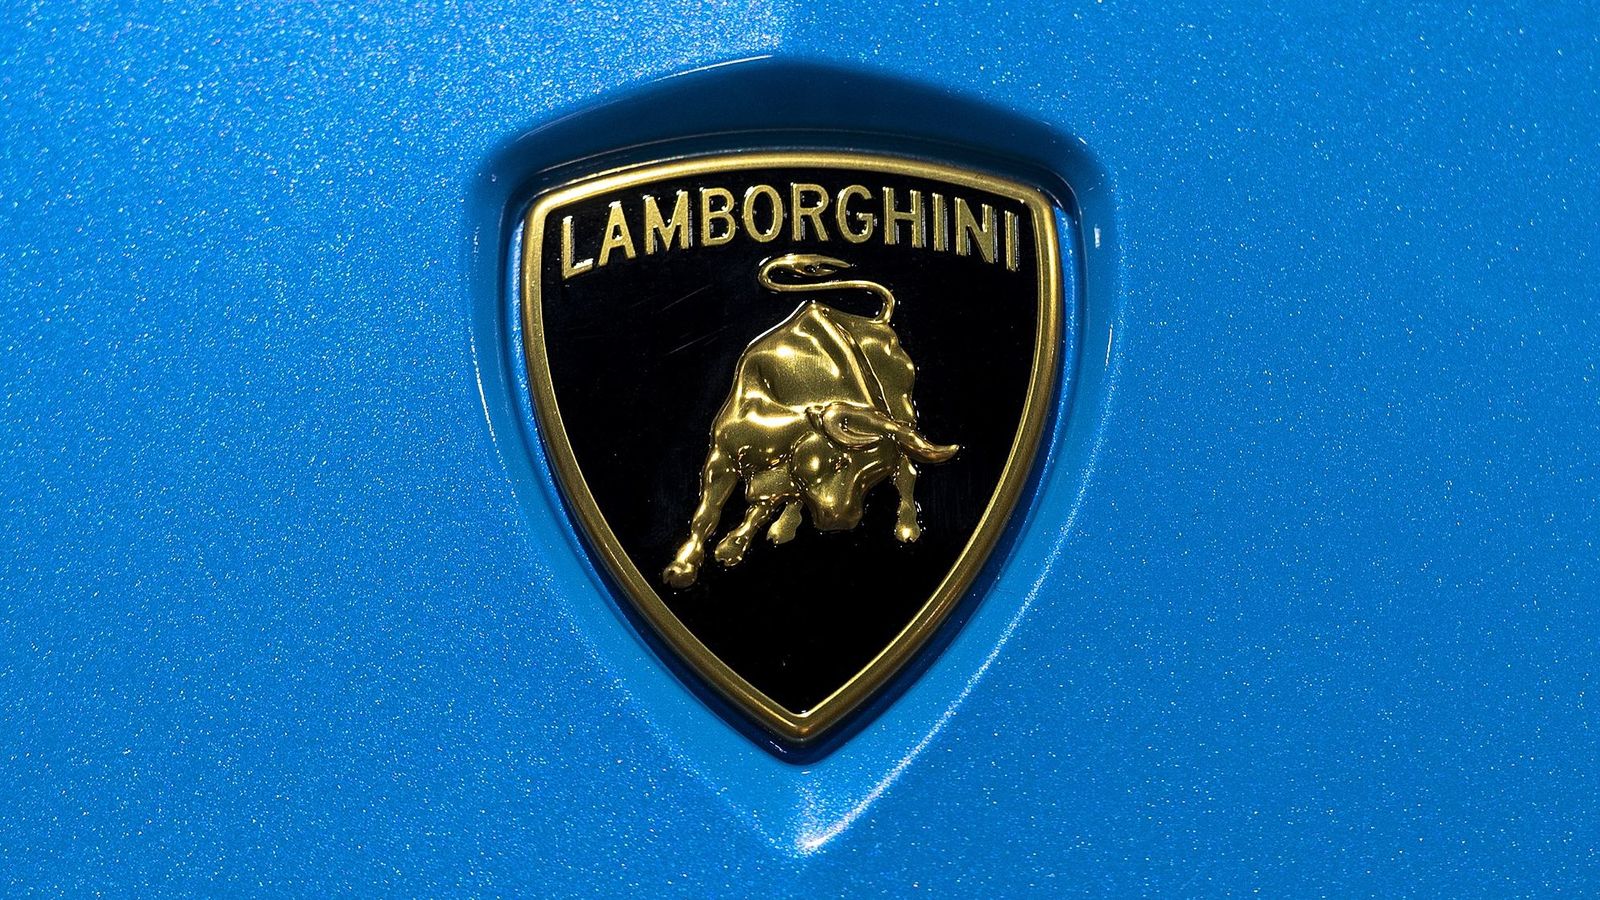 Lamborghini developing its first EV, may arrive by 2027: Report | HT Auto